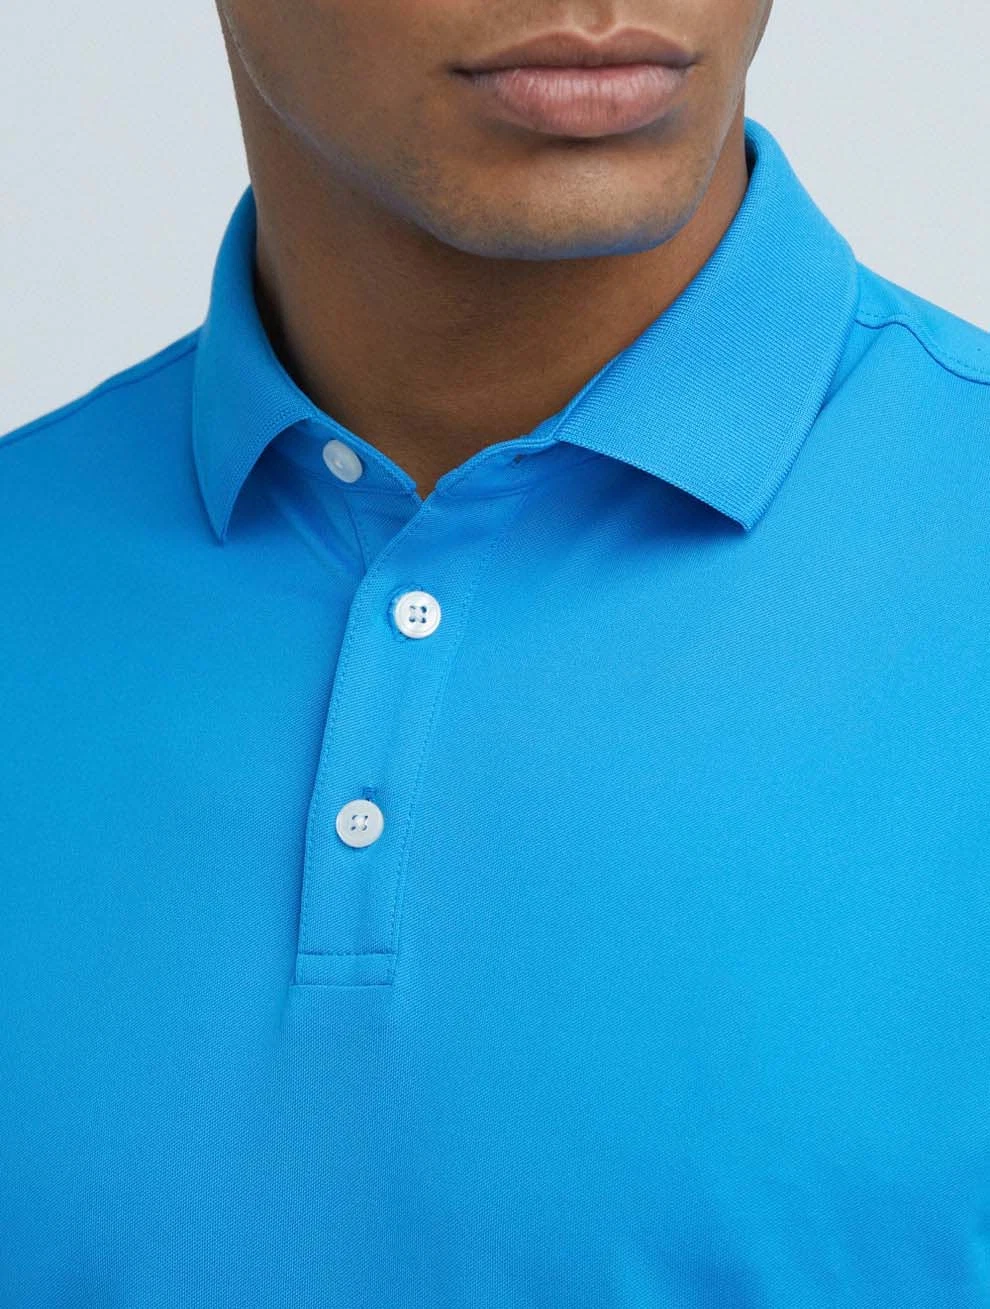 Quick Dry Polyester Polo Shirt Bulk Wholesale Embroidered Plain Short Sleeve Summer Casual Sports Gym Golf Polo T Shirt for Men